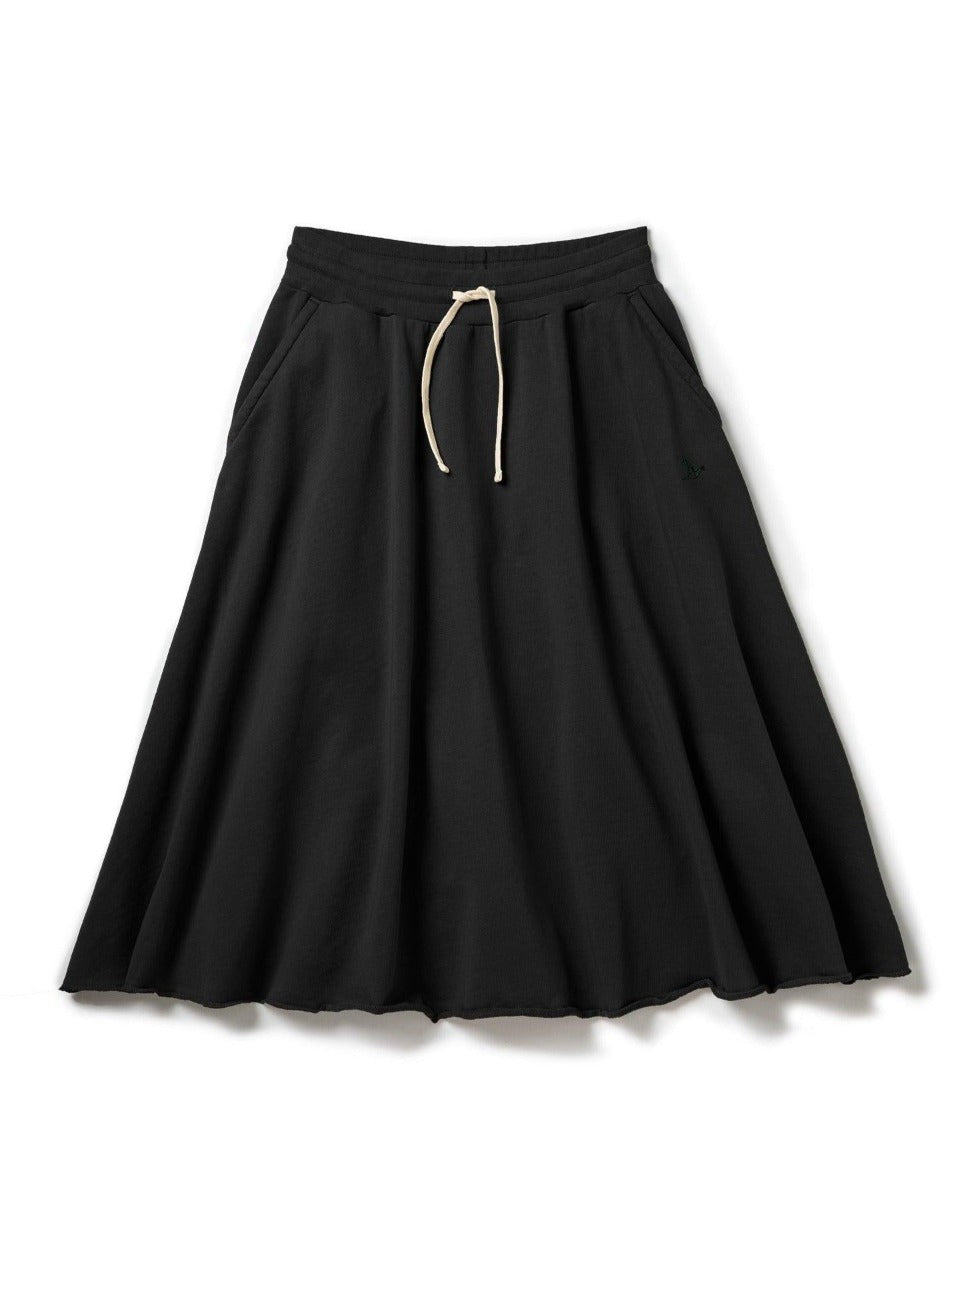 Terry Skirt - Black - ORILABO Project